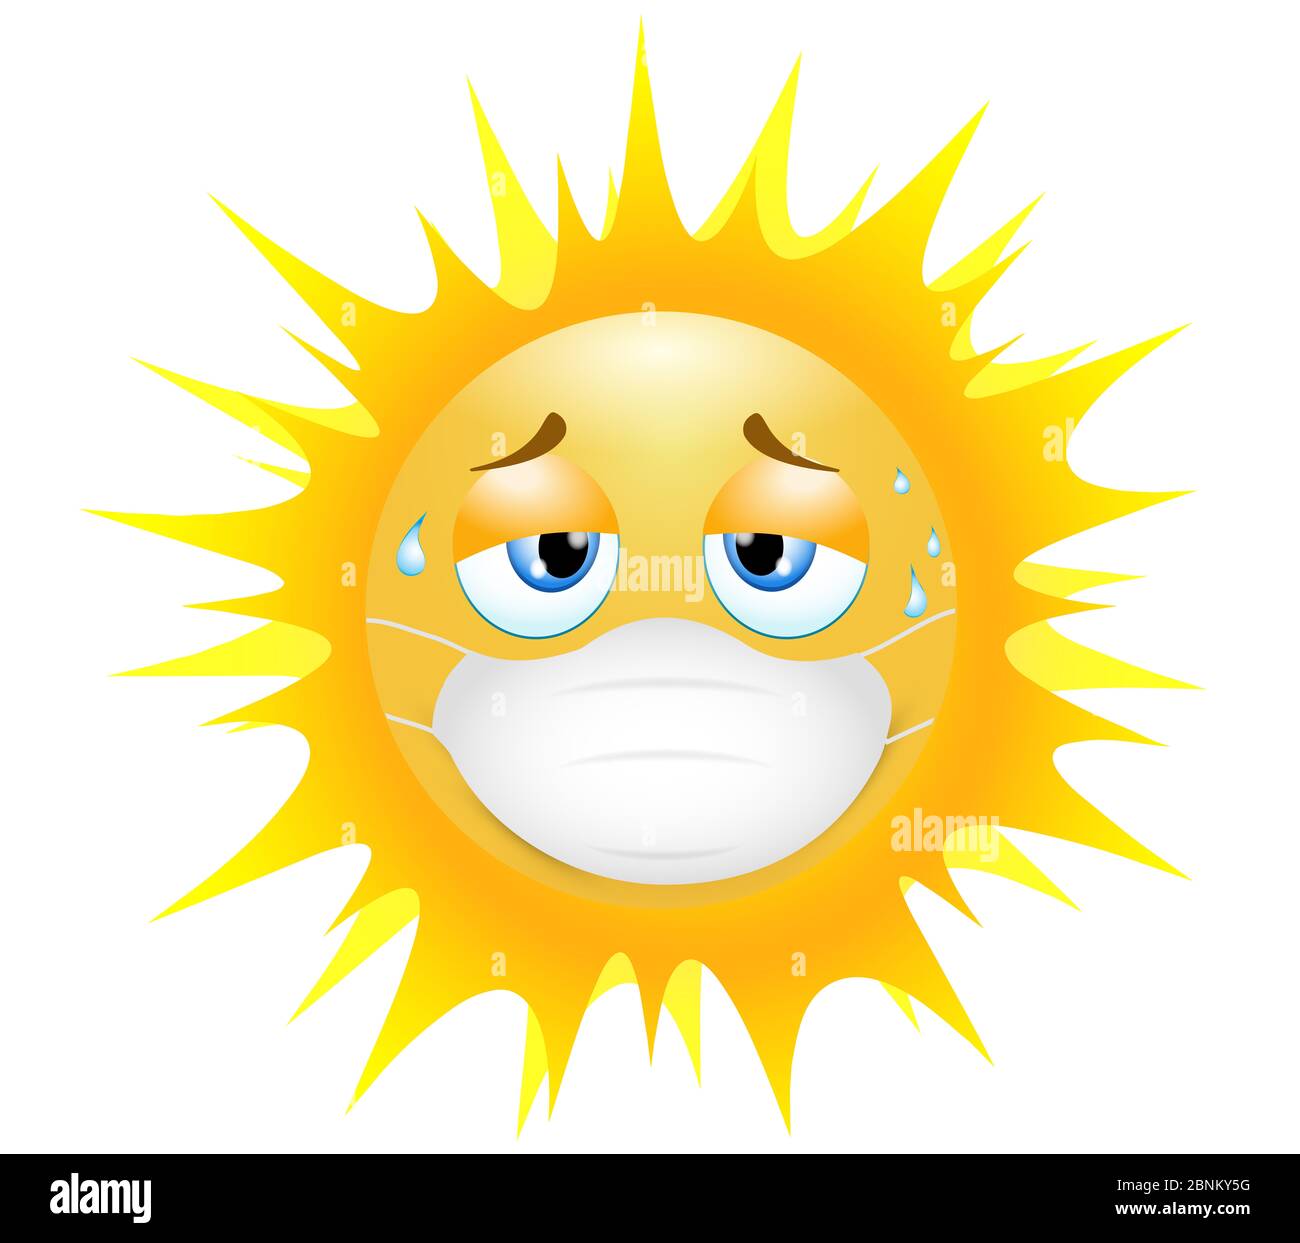 Emoji emoticon sun. Concept of tiredness in wearing the medical mask in the sultry heat. 3d illustration. Funny emoticon. Coronavirus outbreak protect Stock Photo